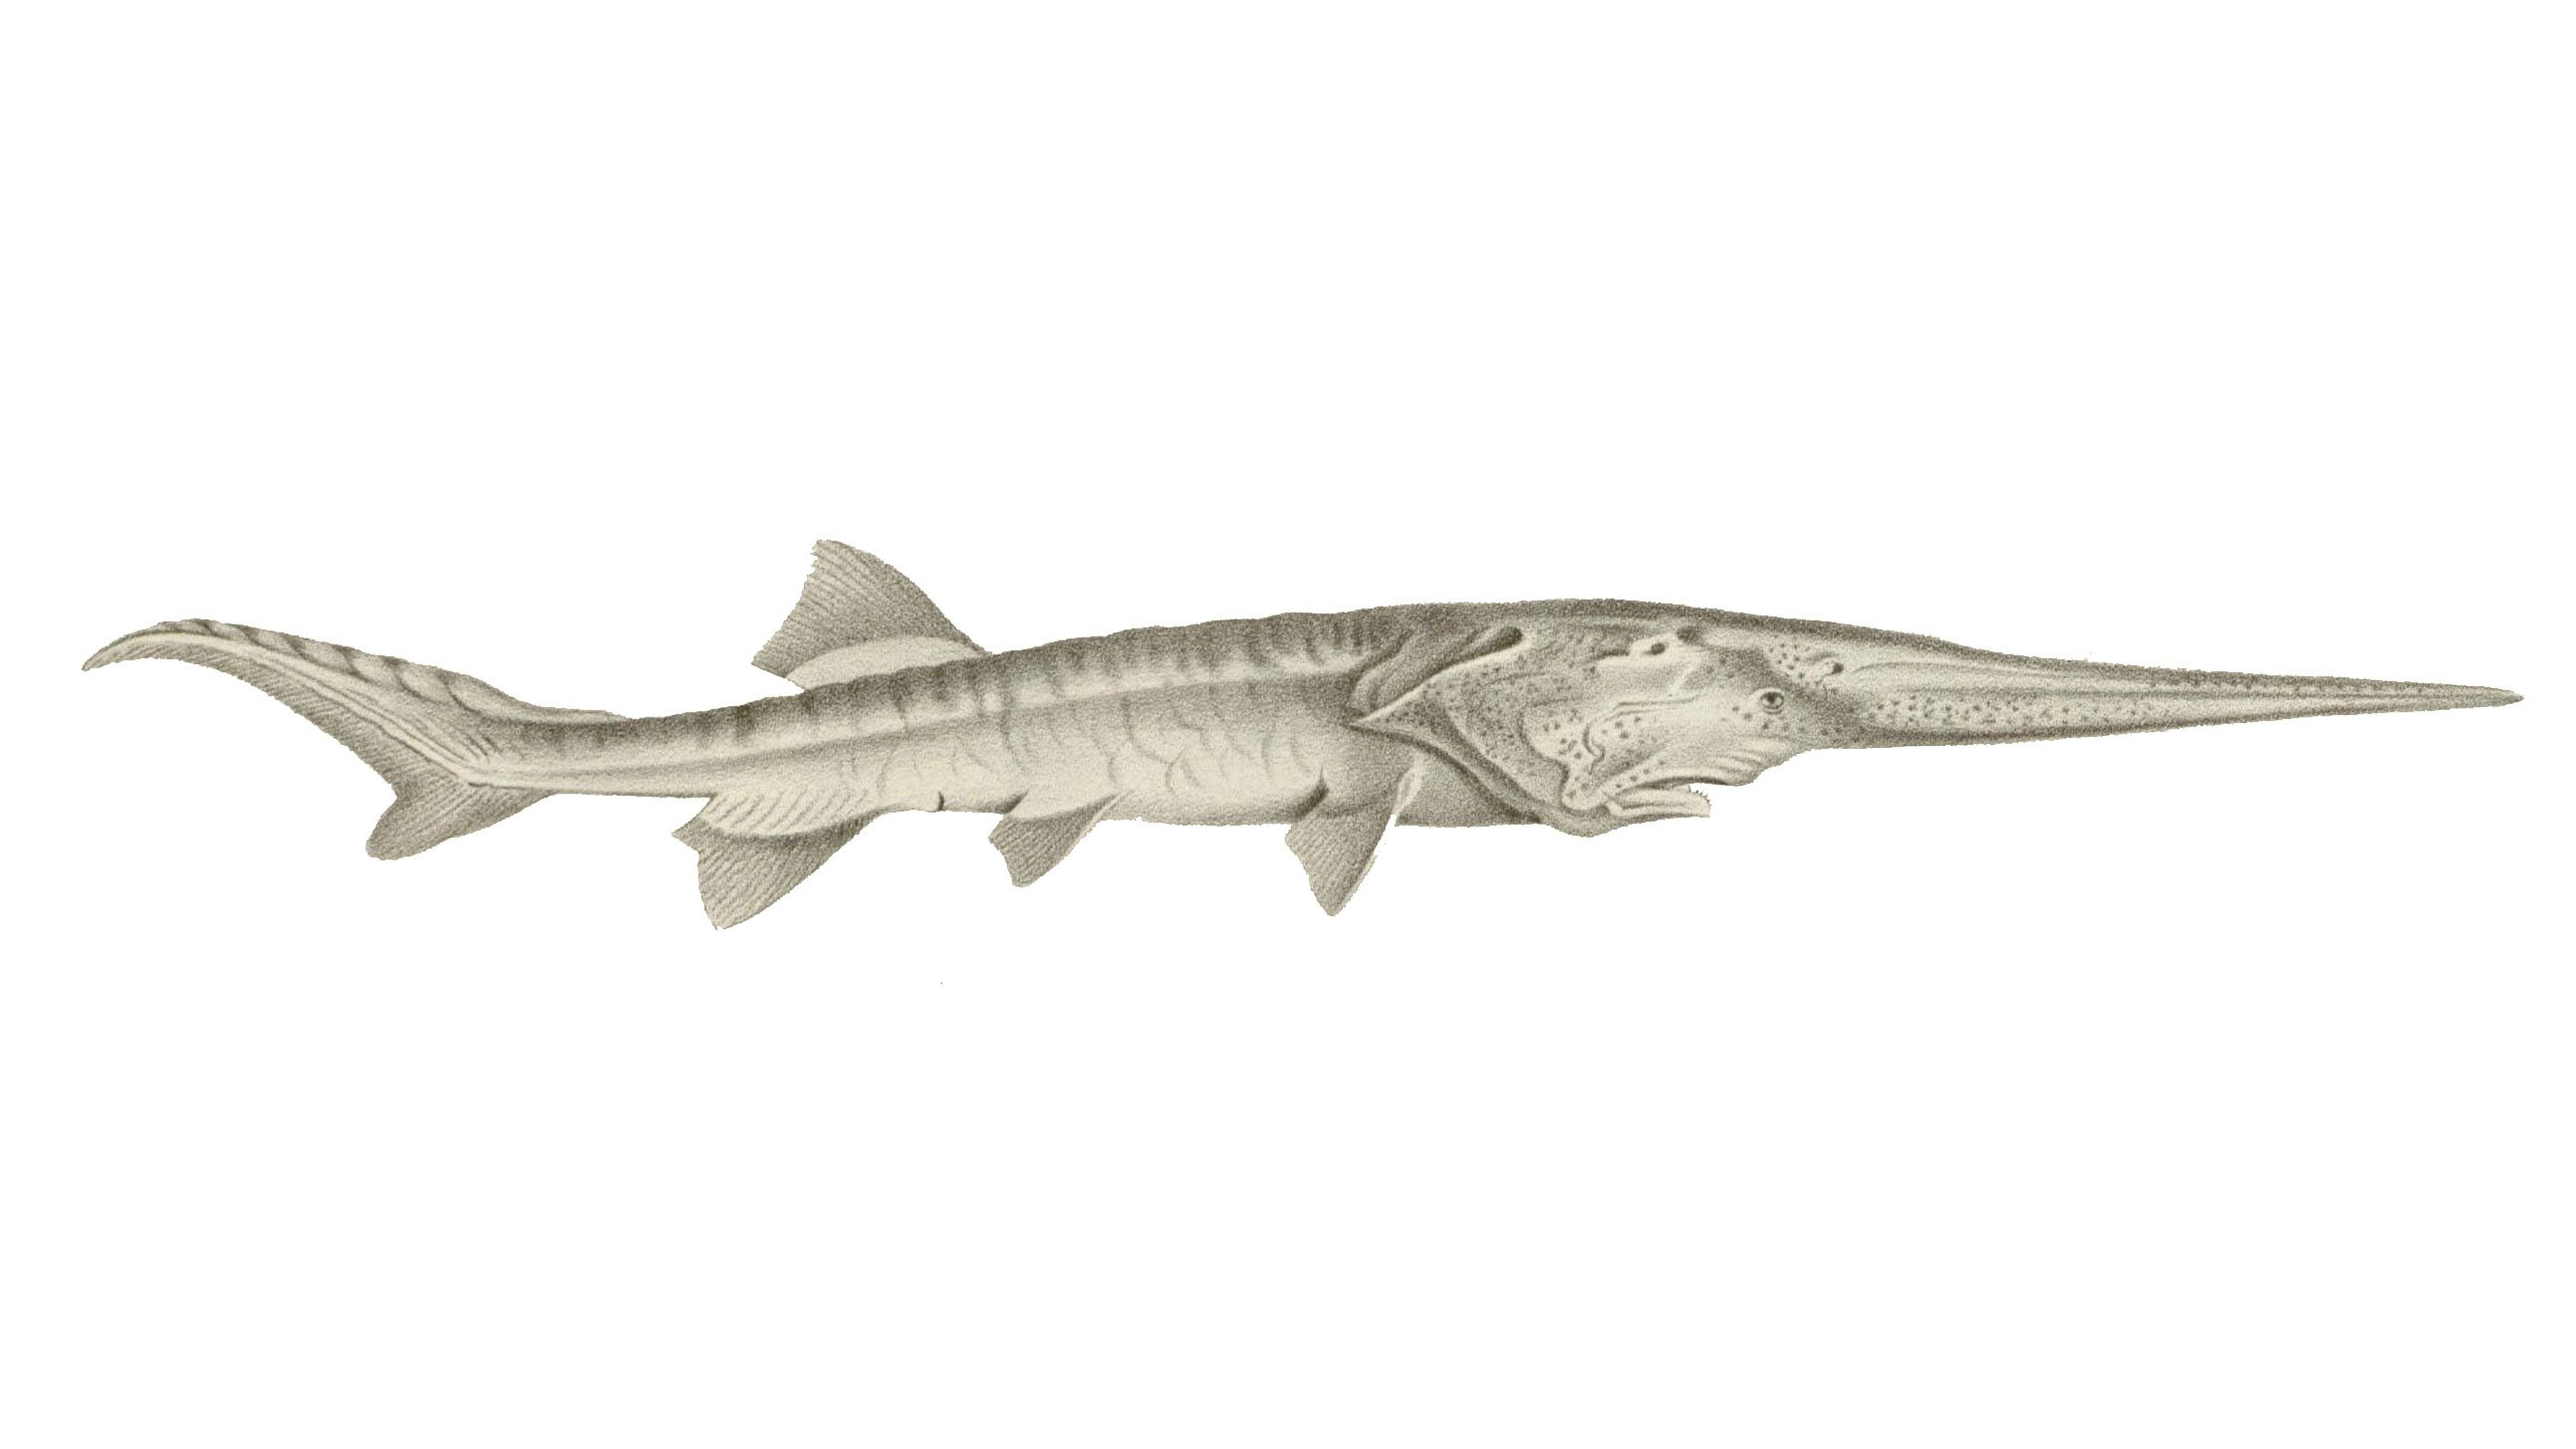 The Chinese paddlefish reached up to 7 meters (23 feet) in length and weighed up to 450 kilograms (992 pounds).